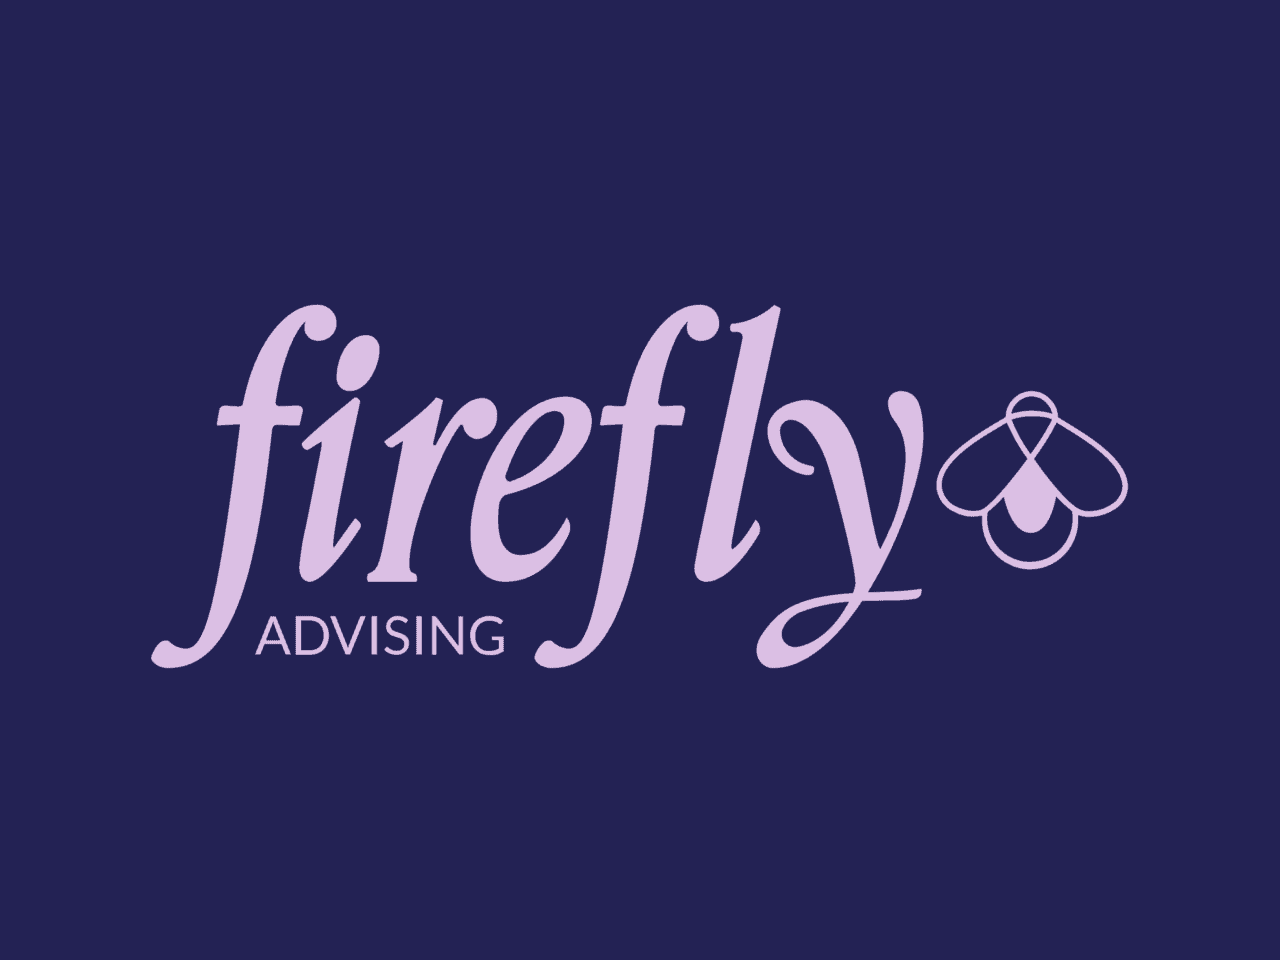 Pale purple text reads 'Firefly Advising' next to an outline of a firefly on a navy blue background